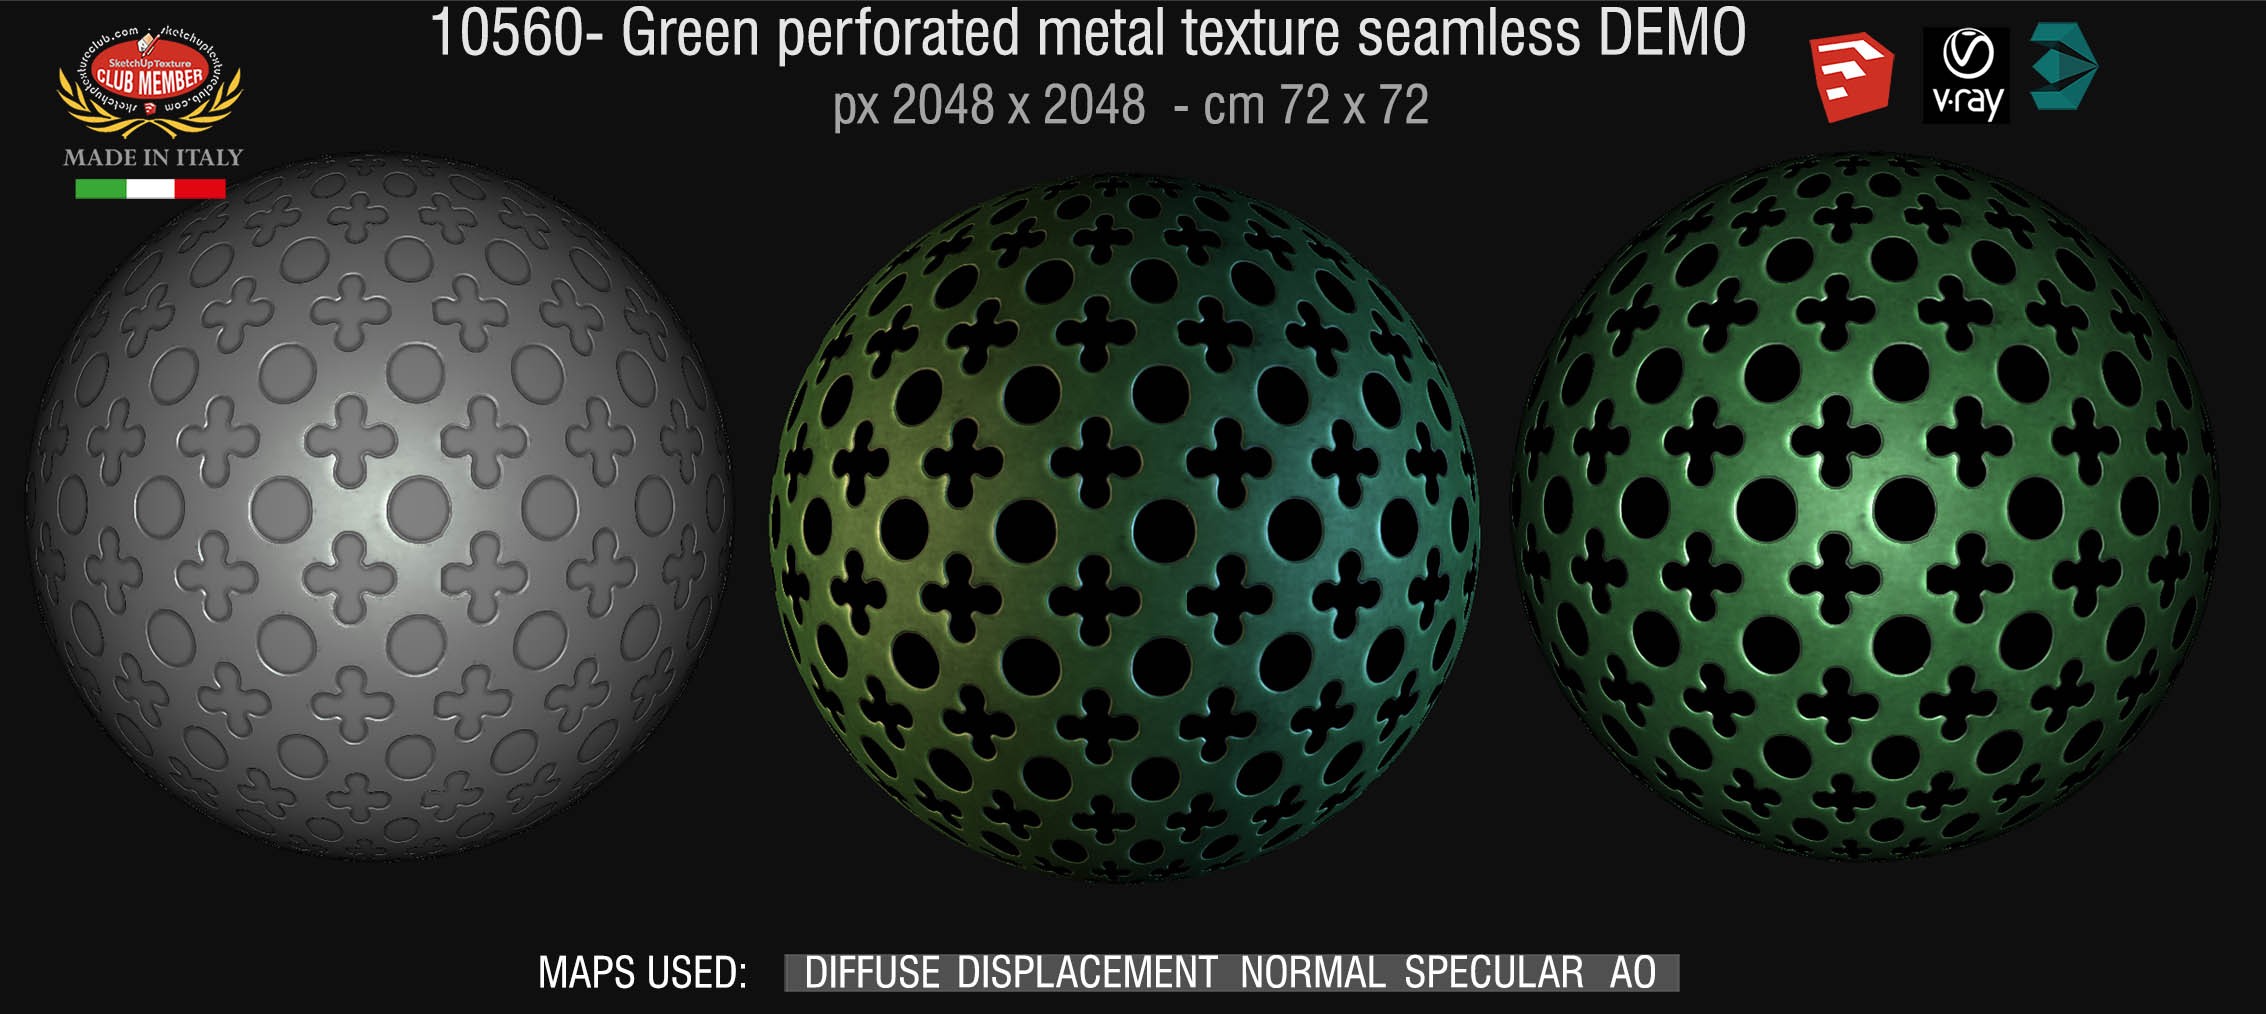 10560 HR Green perforated metal texture seamless + maps DEMO